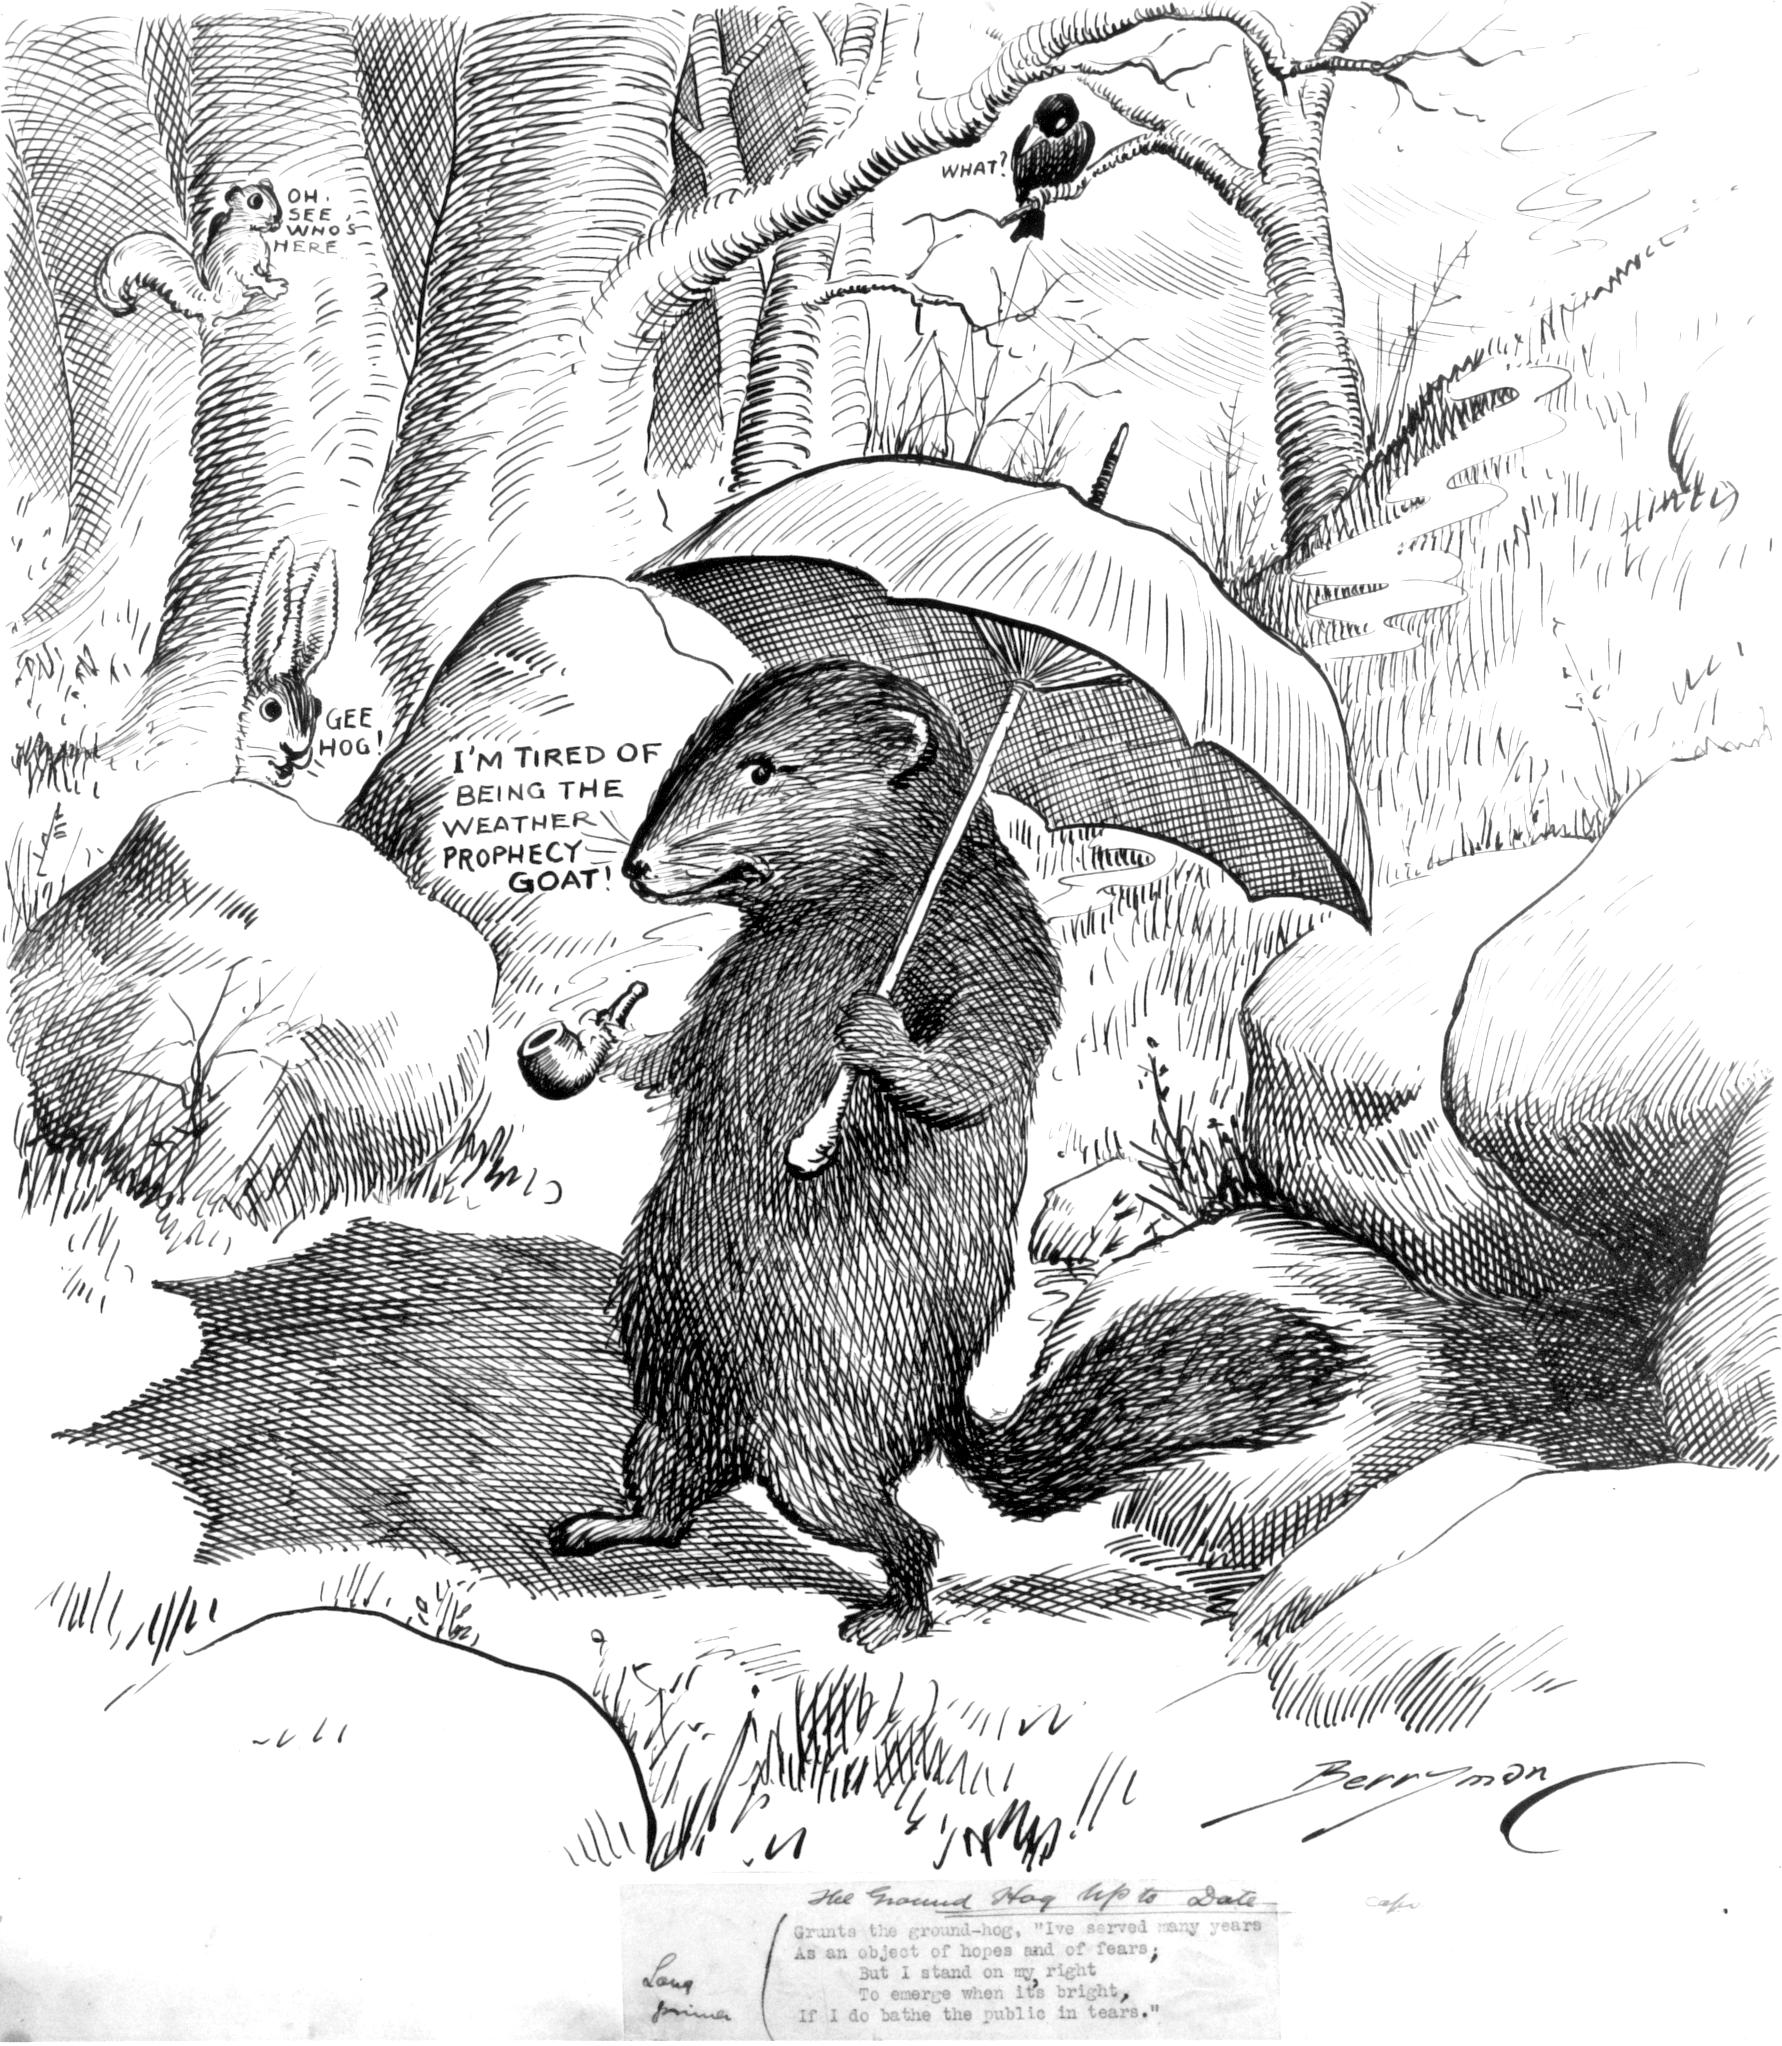 A cartoon groundhog strolls out of its burrow, holding an umbrella and pipe, exclaiming, "I'm tired of being the weather prophecy goat!"